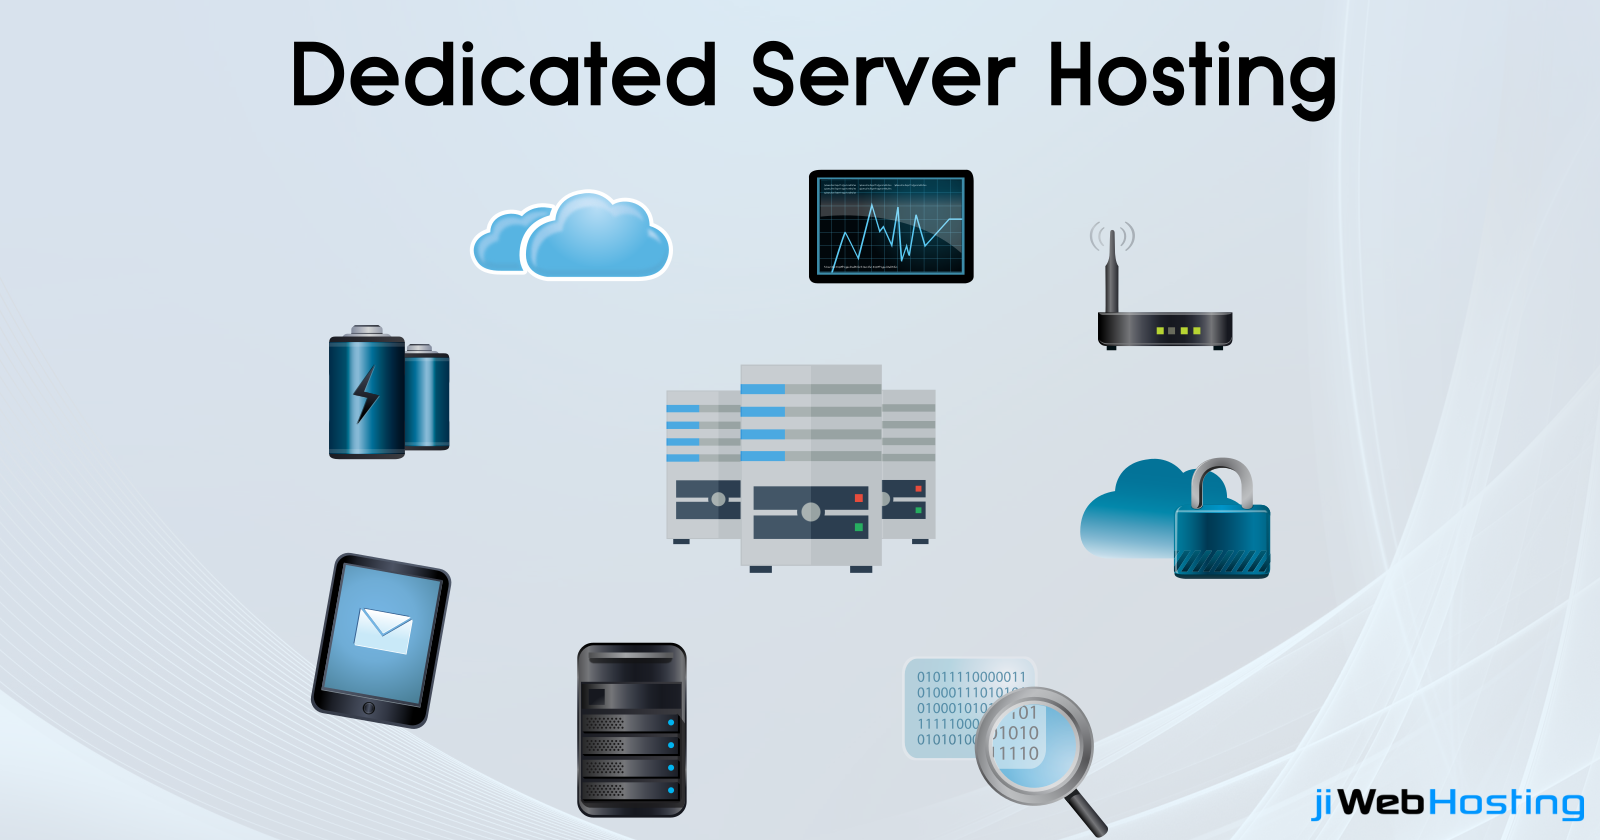 Making an Immediate Switch to Dedicated Server Hosting for Your Online Business